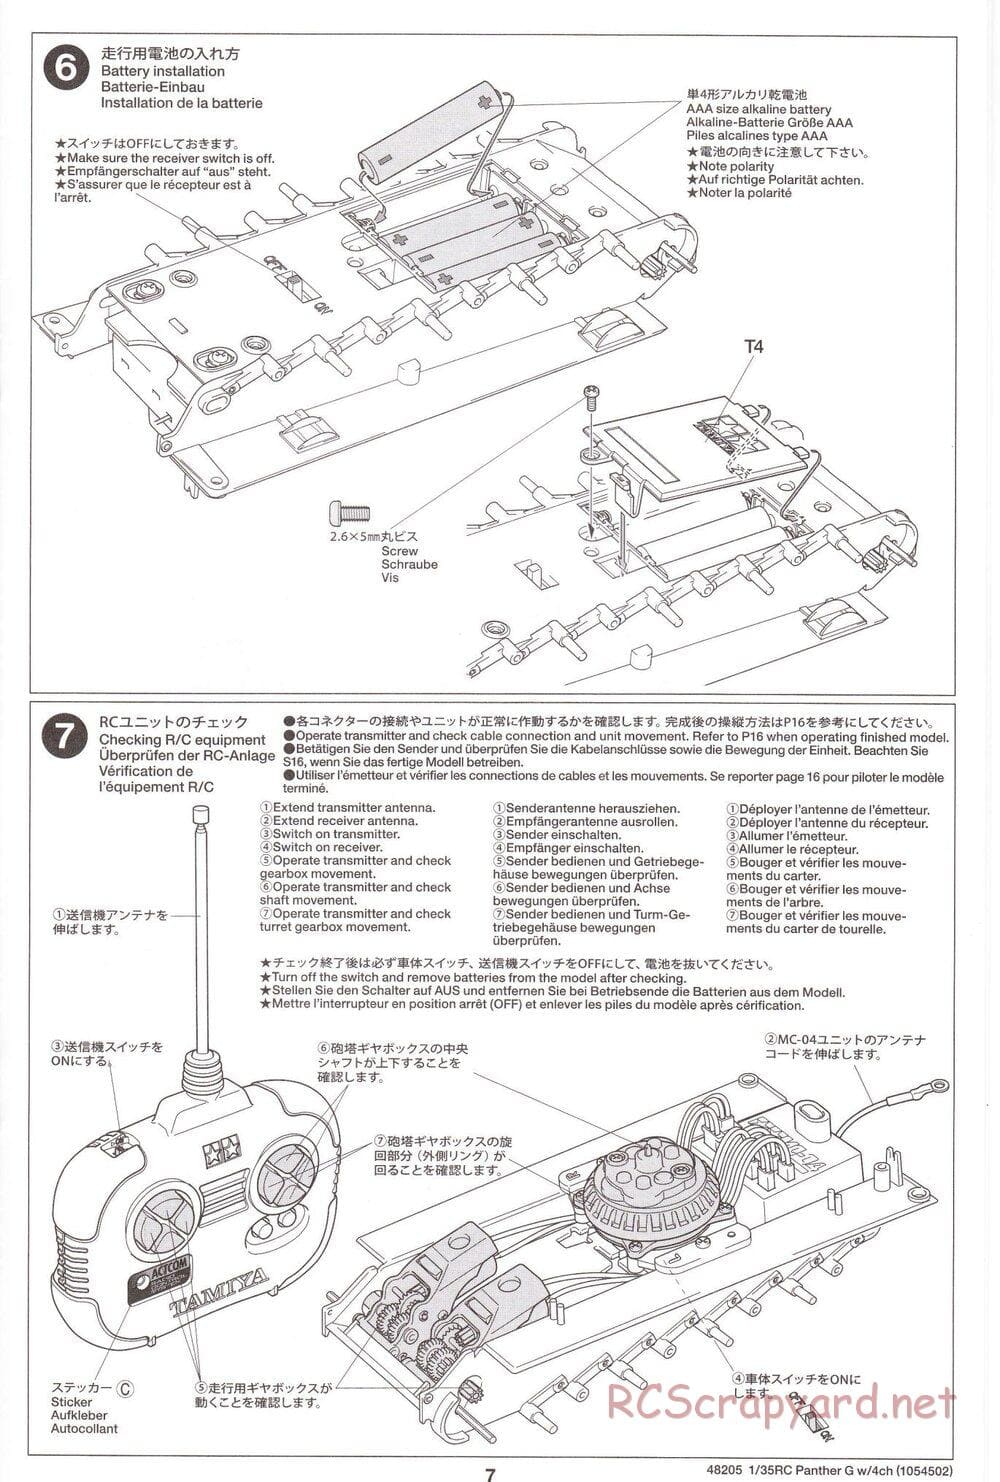 Tamiya - German Panther Type G - 1/35 Scale Chassis - Manual - Page 7